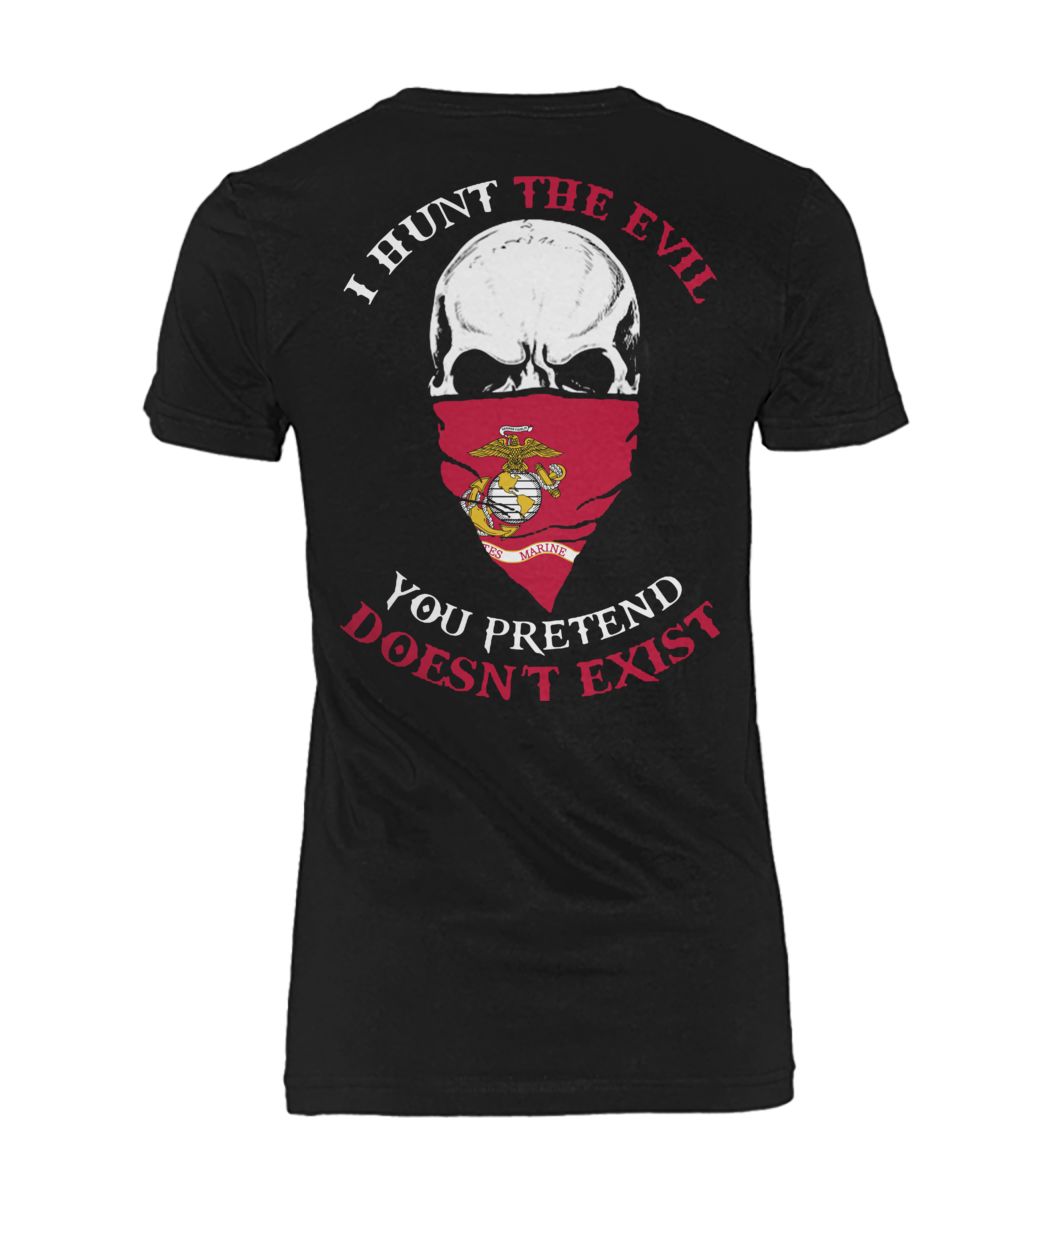 I hunt the evil you pretend doesn't exist marine corps women's crew tee